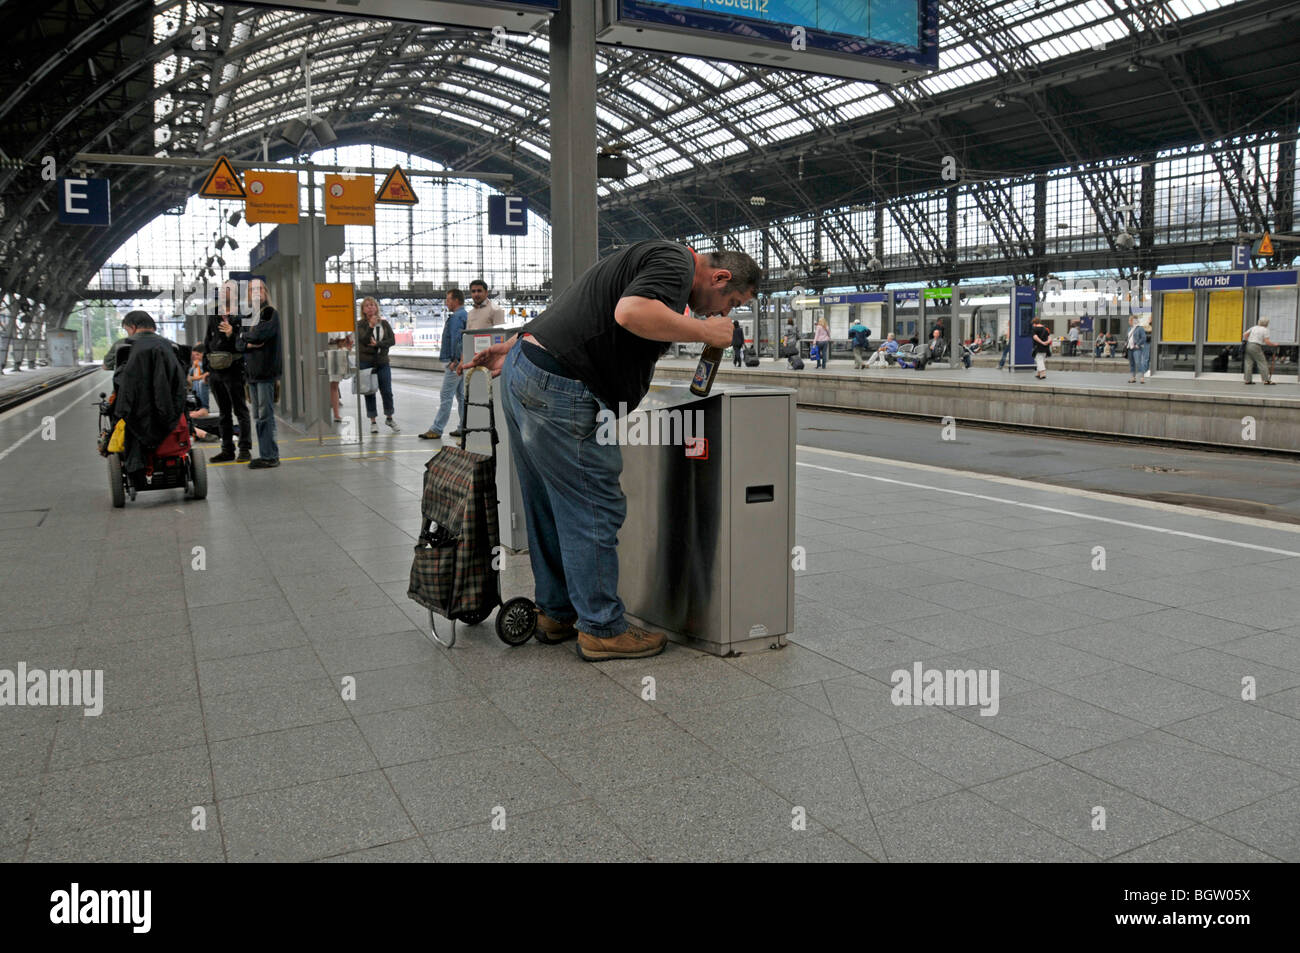 Man collecting deposit bottles in the main station in Cologne, North Rhine-Westphalia, Germany, Europe Stock Photo